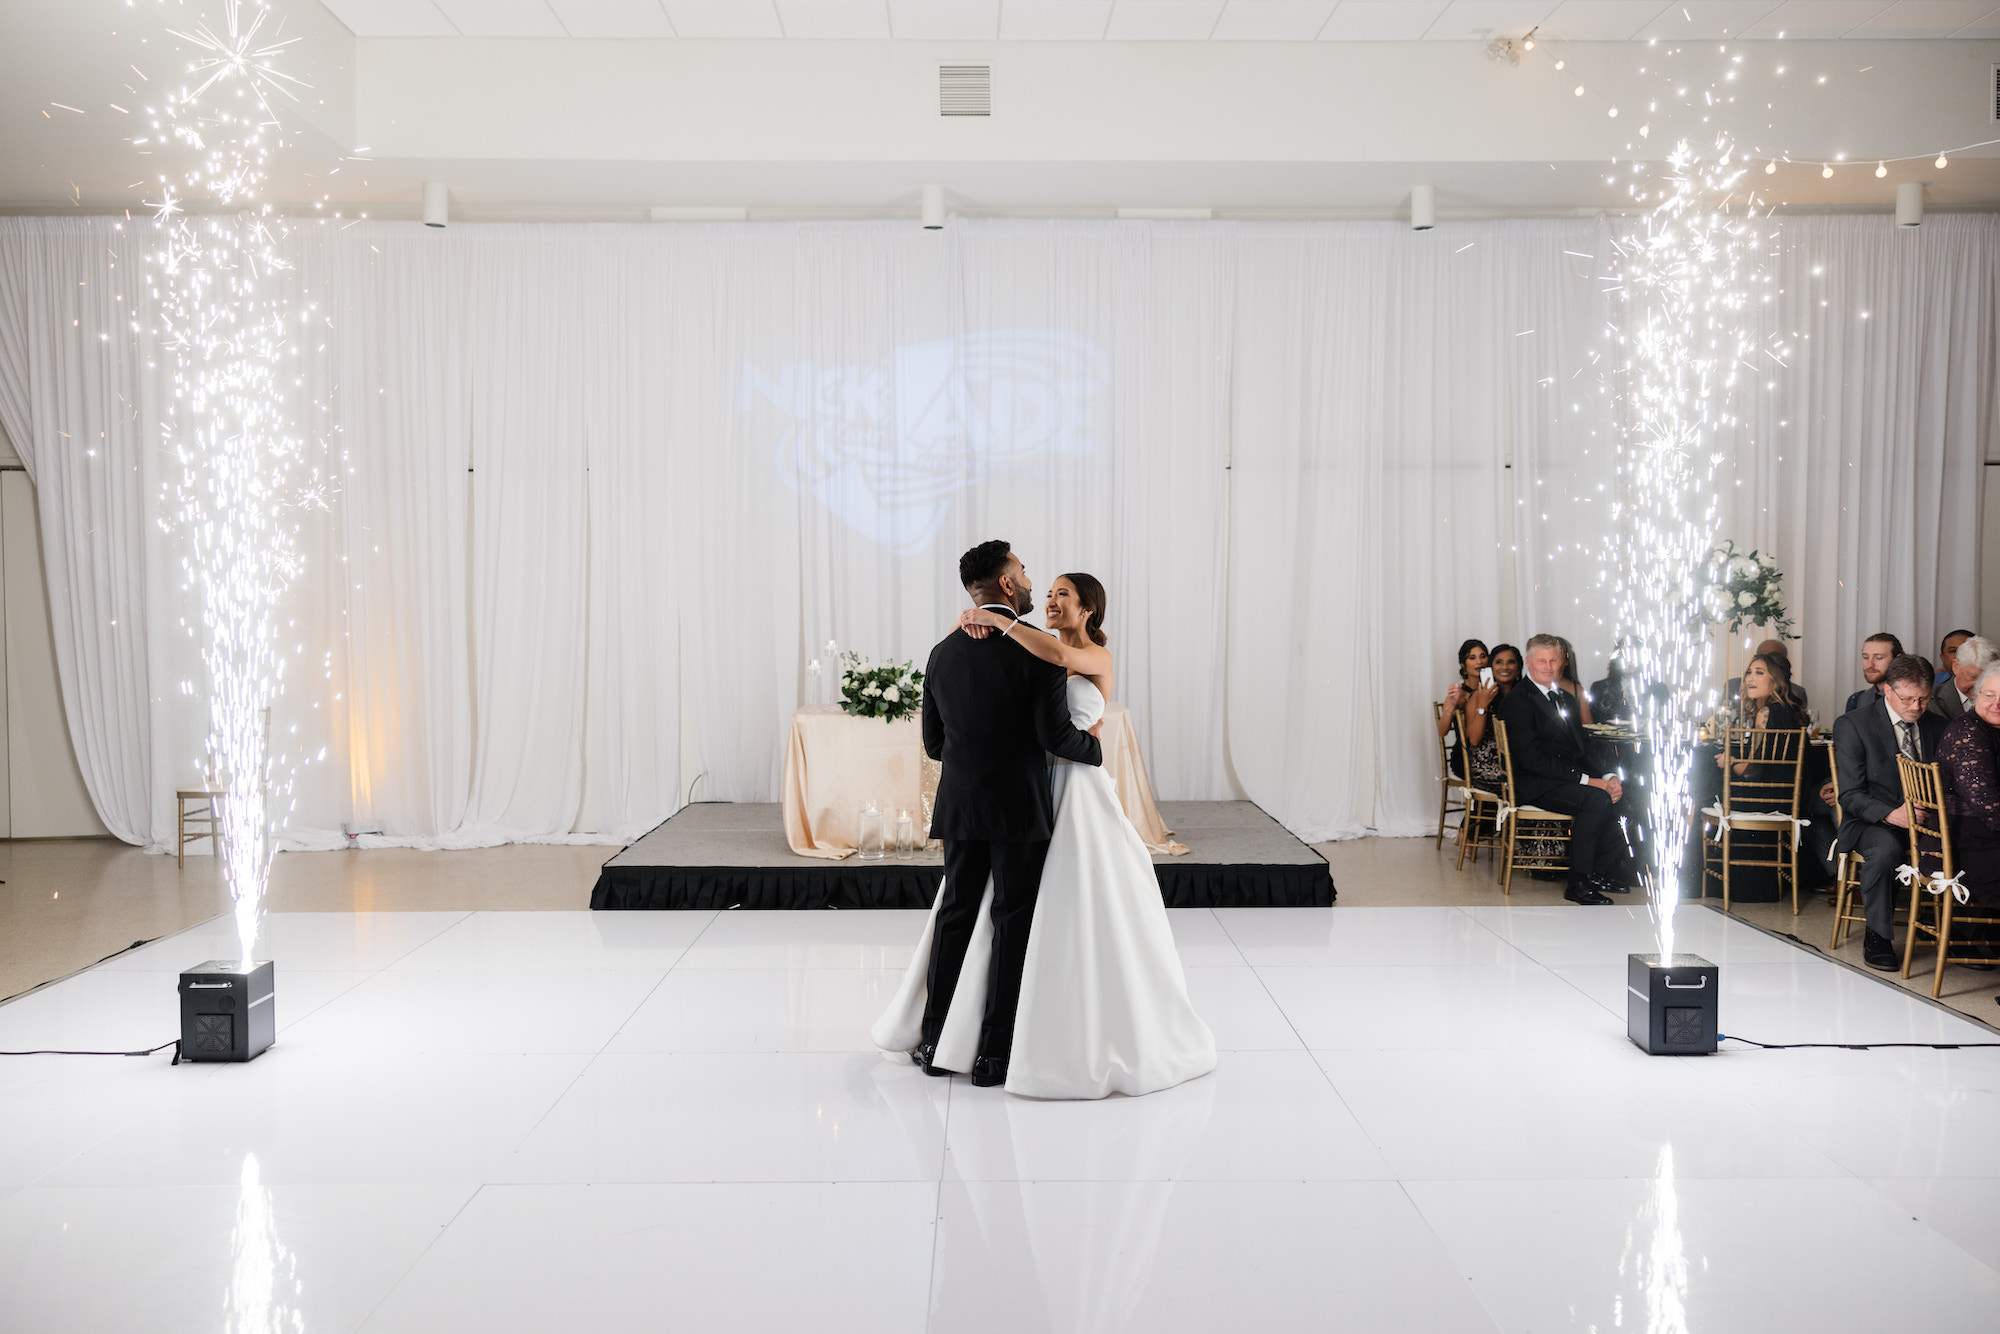 Classic Timeless Bride and Groom New Years Eve Wedding Reception, Bride and Groom First Dance with Sparklers